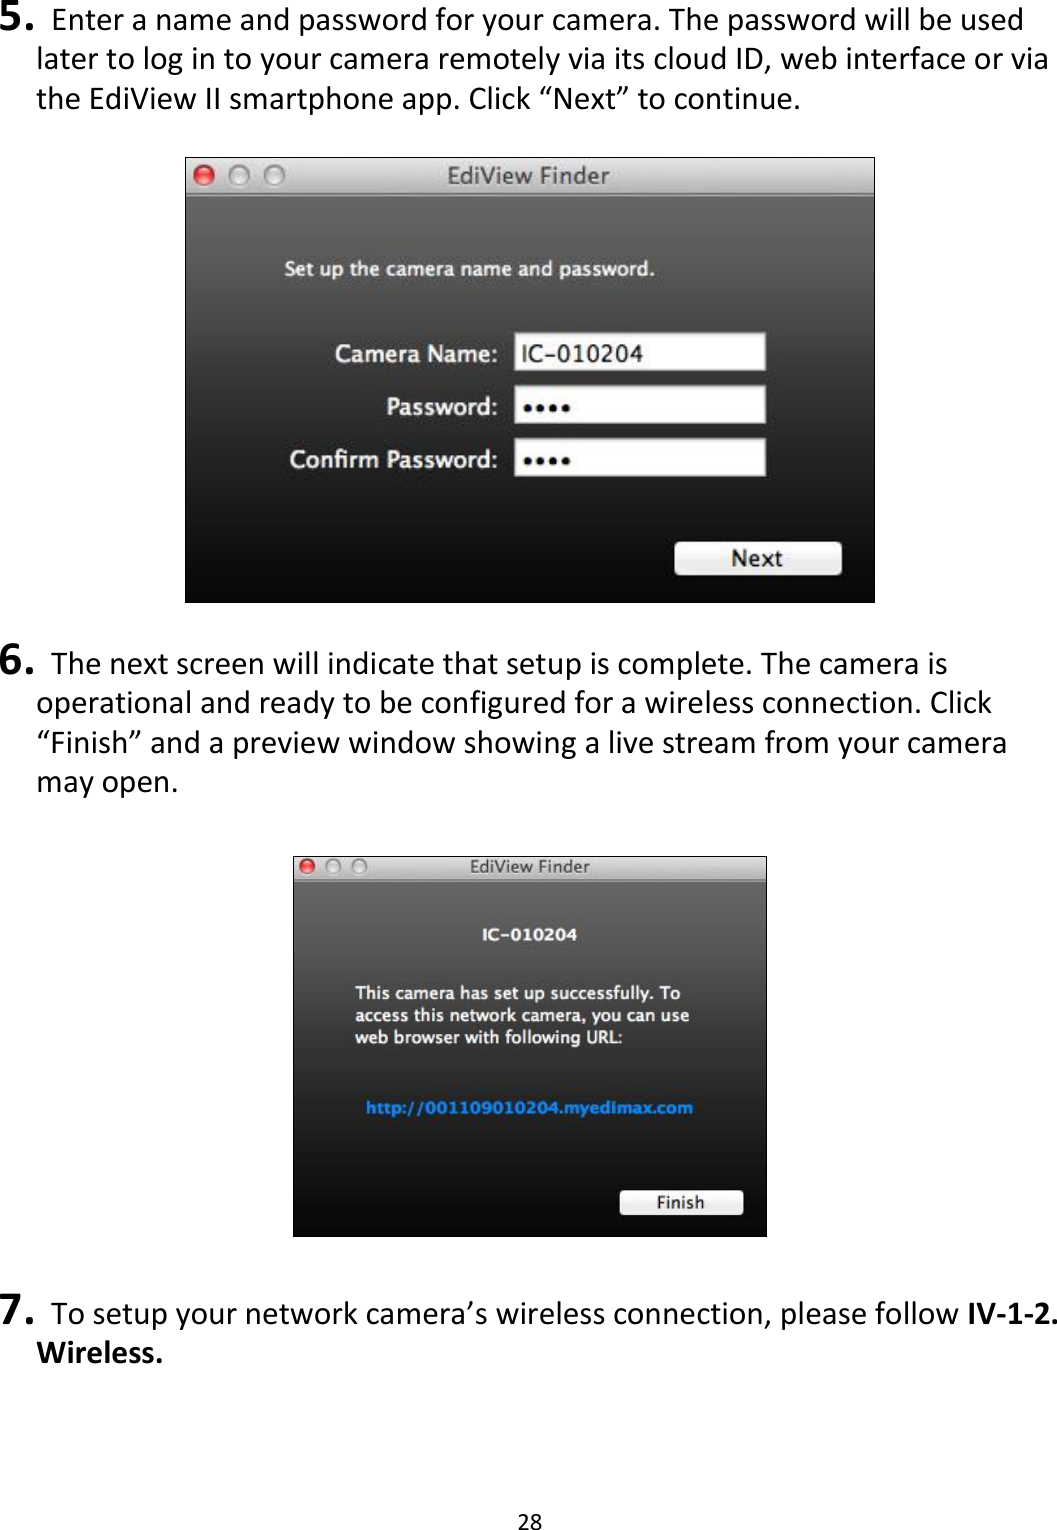 28   5.   Enter a name and password for your camera. The password will be used later to log in to your camera remotely via its cloud ID, web interface or via the EdiView II smartphone app. Click “Next” to continue.    6.   The next screen will indicate that setup is complete. The camera is operational and ready to be configured for a wireless connection. Click “Finish” and a preview window showing a live stream from your camera may open.    7.   To setup your network camera’s wireless connection, please follow IV-1-2. Wireless. 